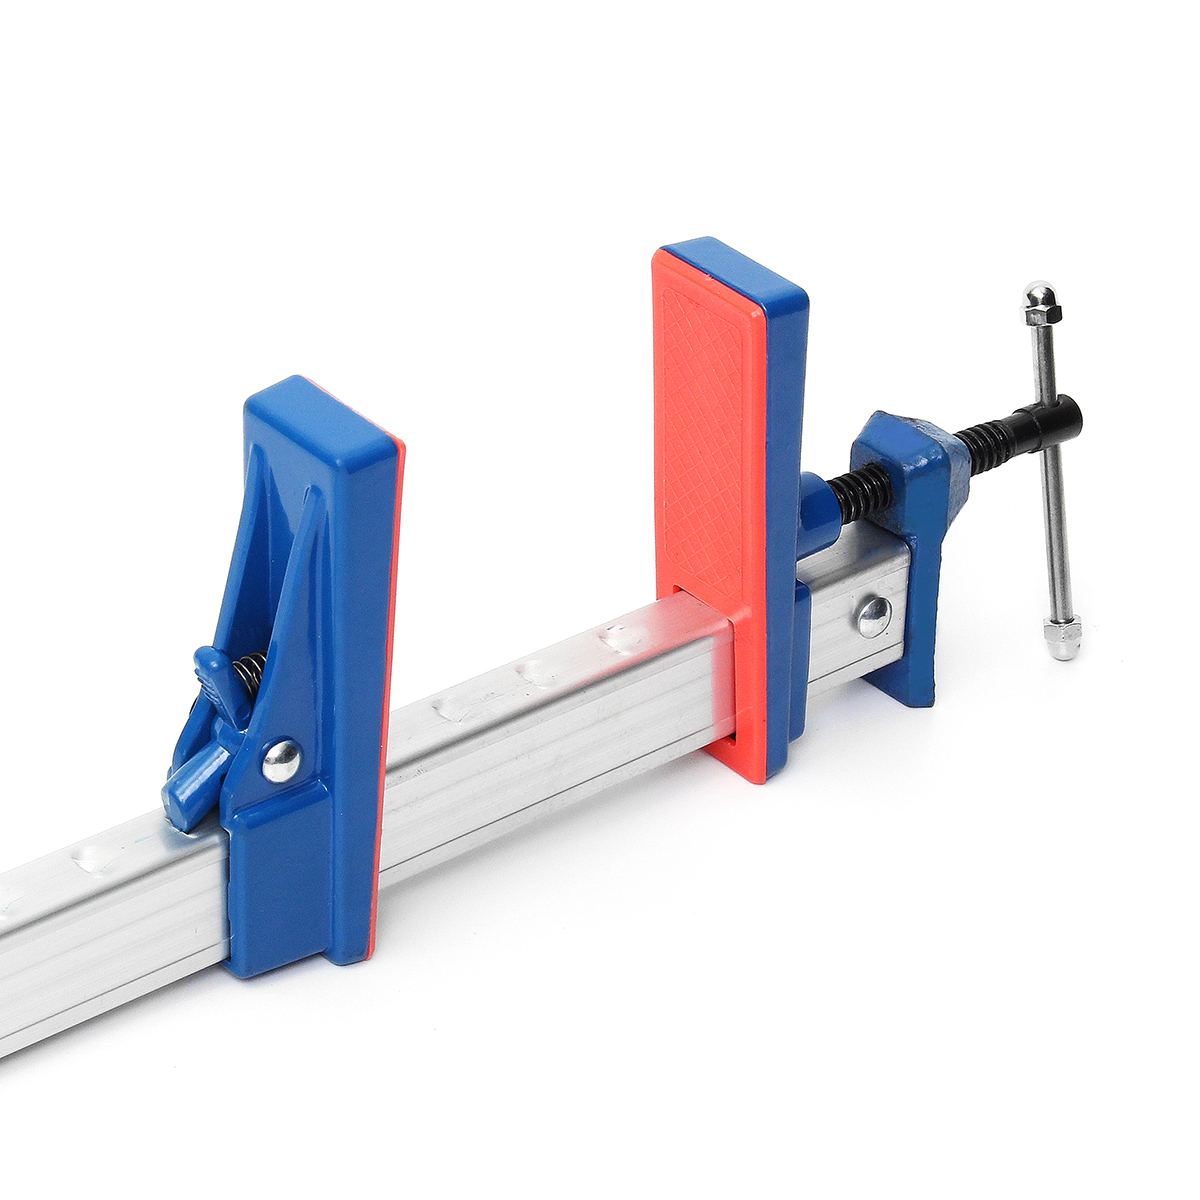 2436-Inch-Aluminum-Alloy-F-Clamp-Bar-Quick-Release-Woodworking-Clamp-Parallel-Adjustable-Heavy-Duty--1361735-9